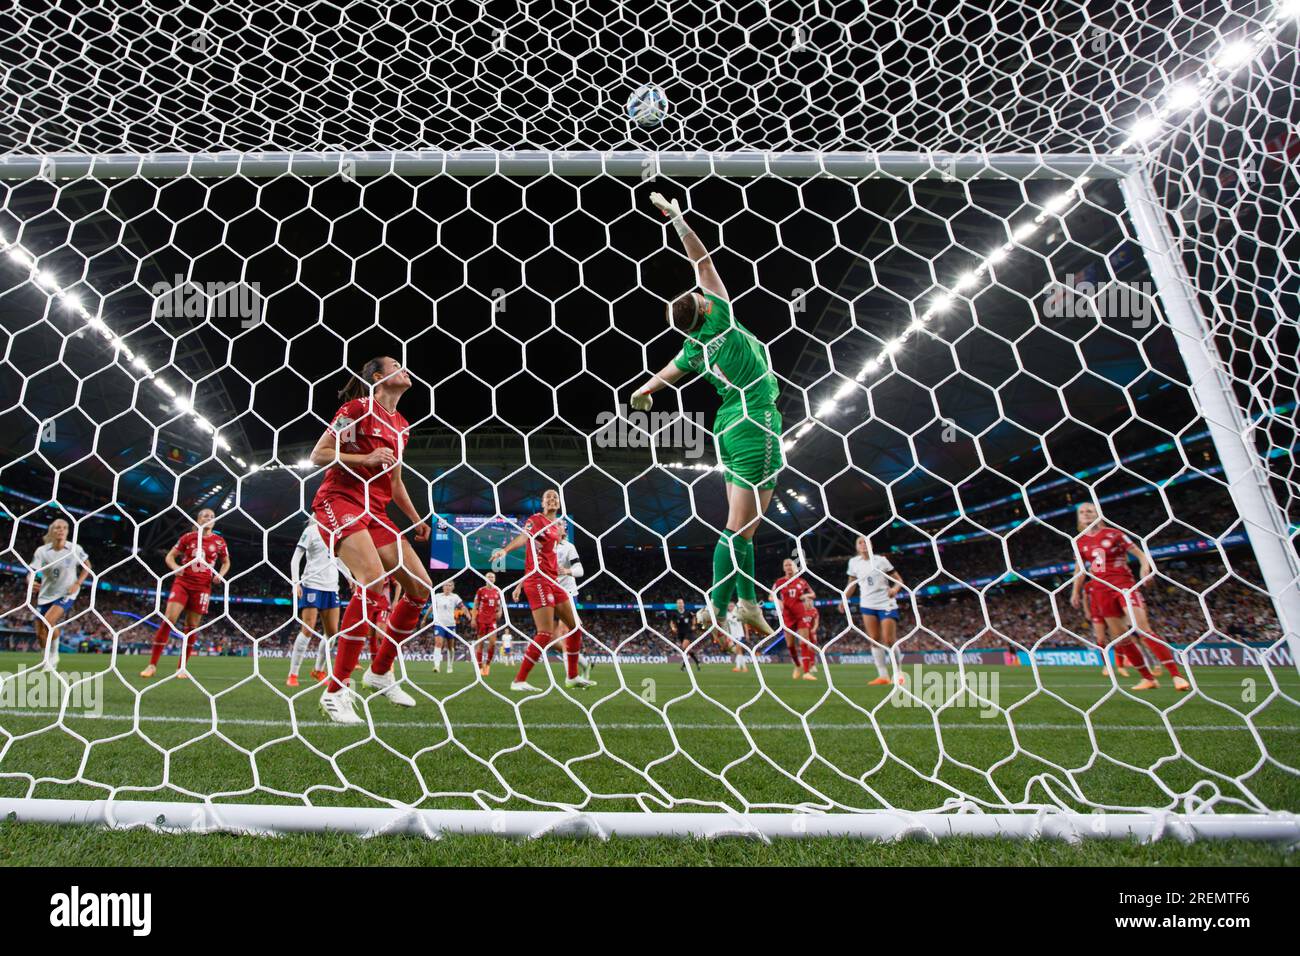 Sydney, Australia. 28th July, 2023. Goal keeper, Lene Christensen of Denmark stretches to push the ball away during the FIFA Women's World Cup 2023 Group D match between England and Denmark at Sydney Football Stadium on July 28, 2023 in Sydney, Australia Credit: IOIO IMAGES/Alamy Live News Stock Photo